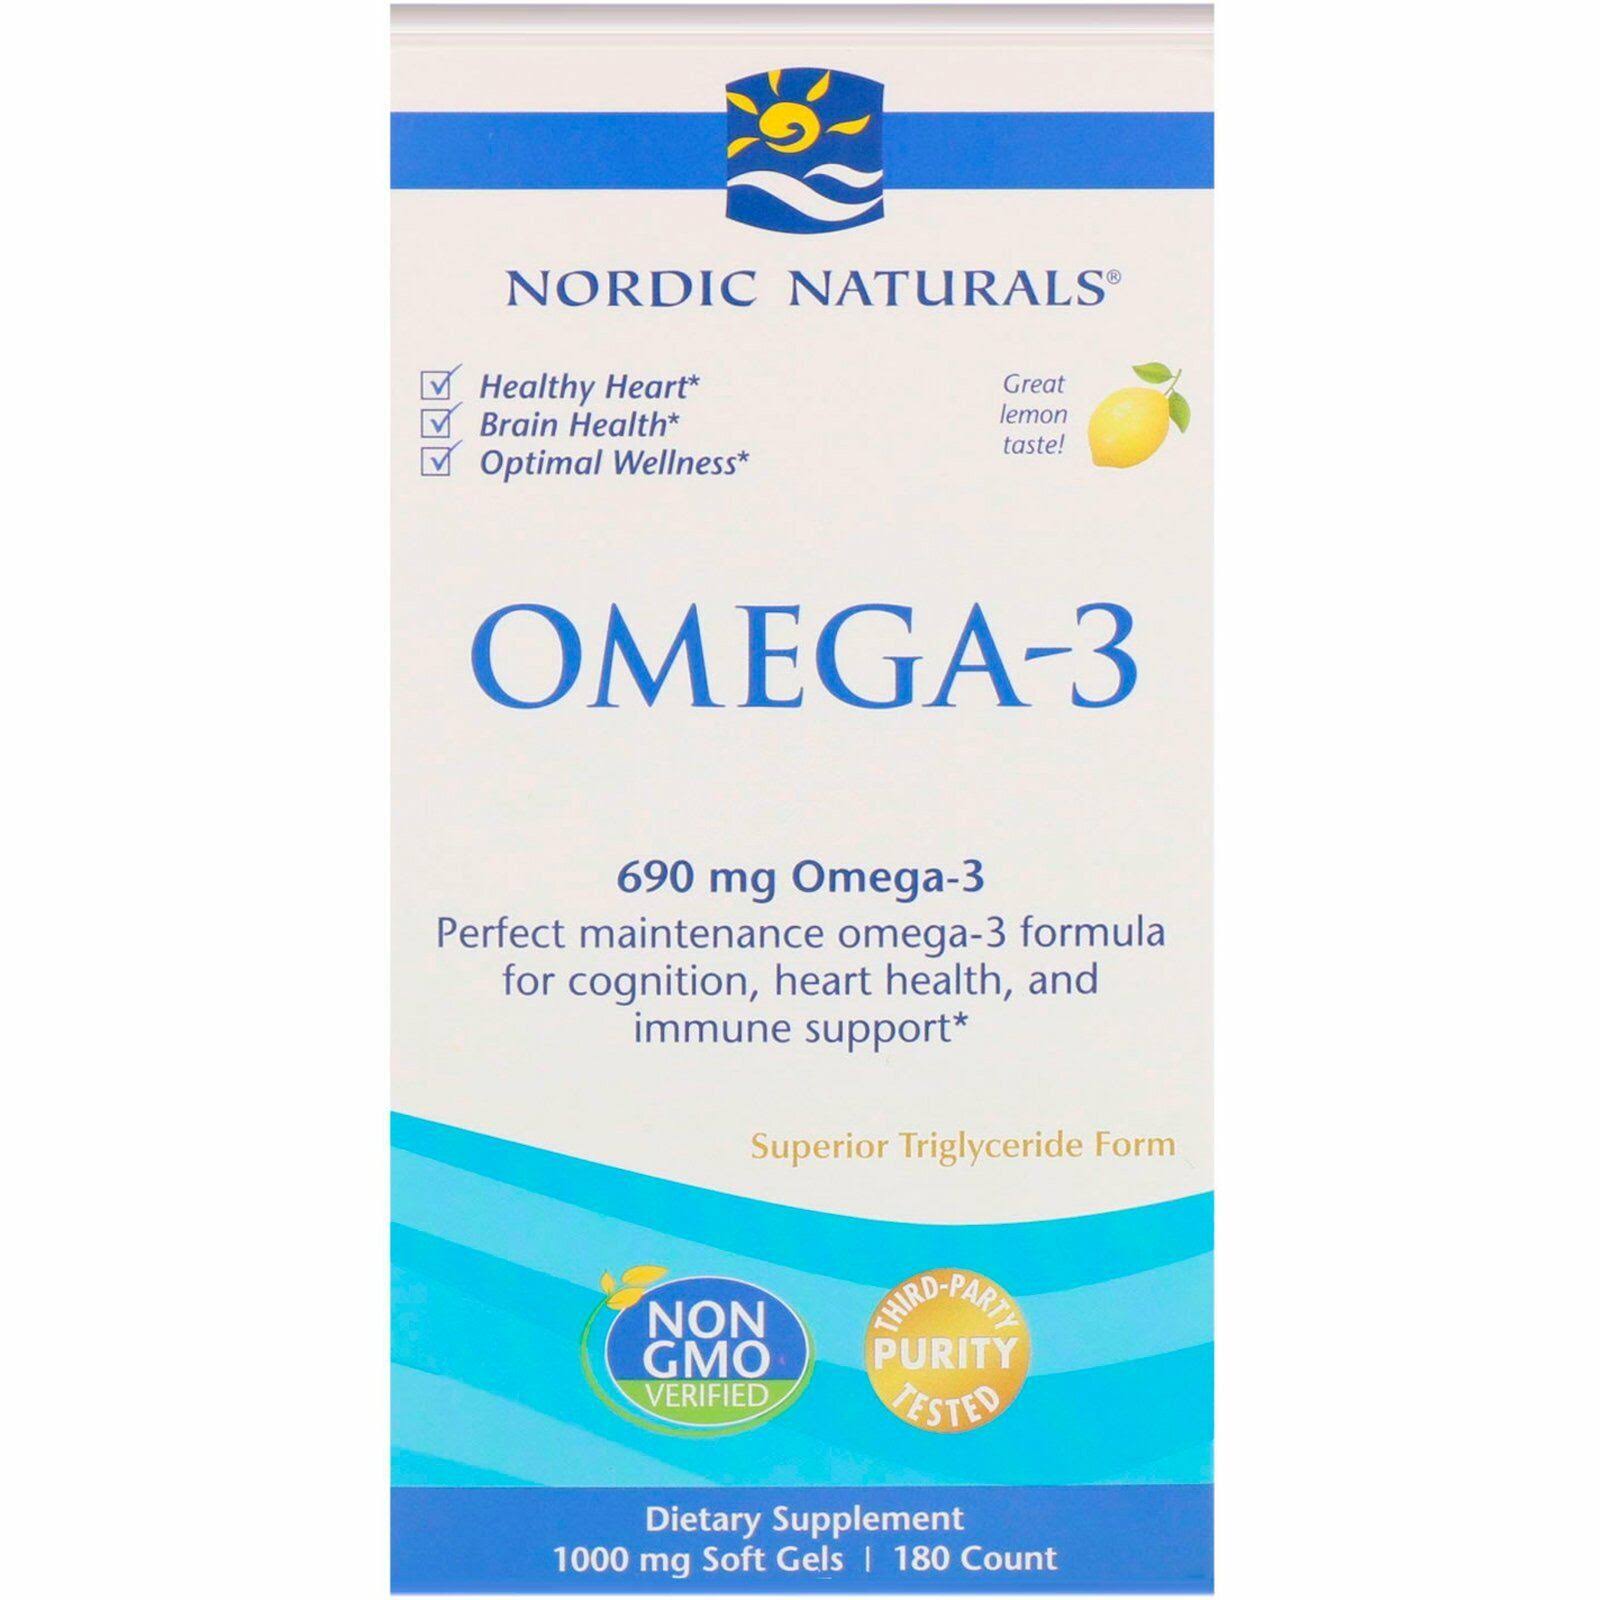 Nordic Naturals Omega 3 Purified Fish Oil with Lemon - 180 Soft Gels